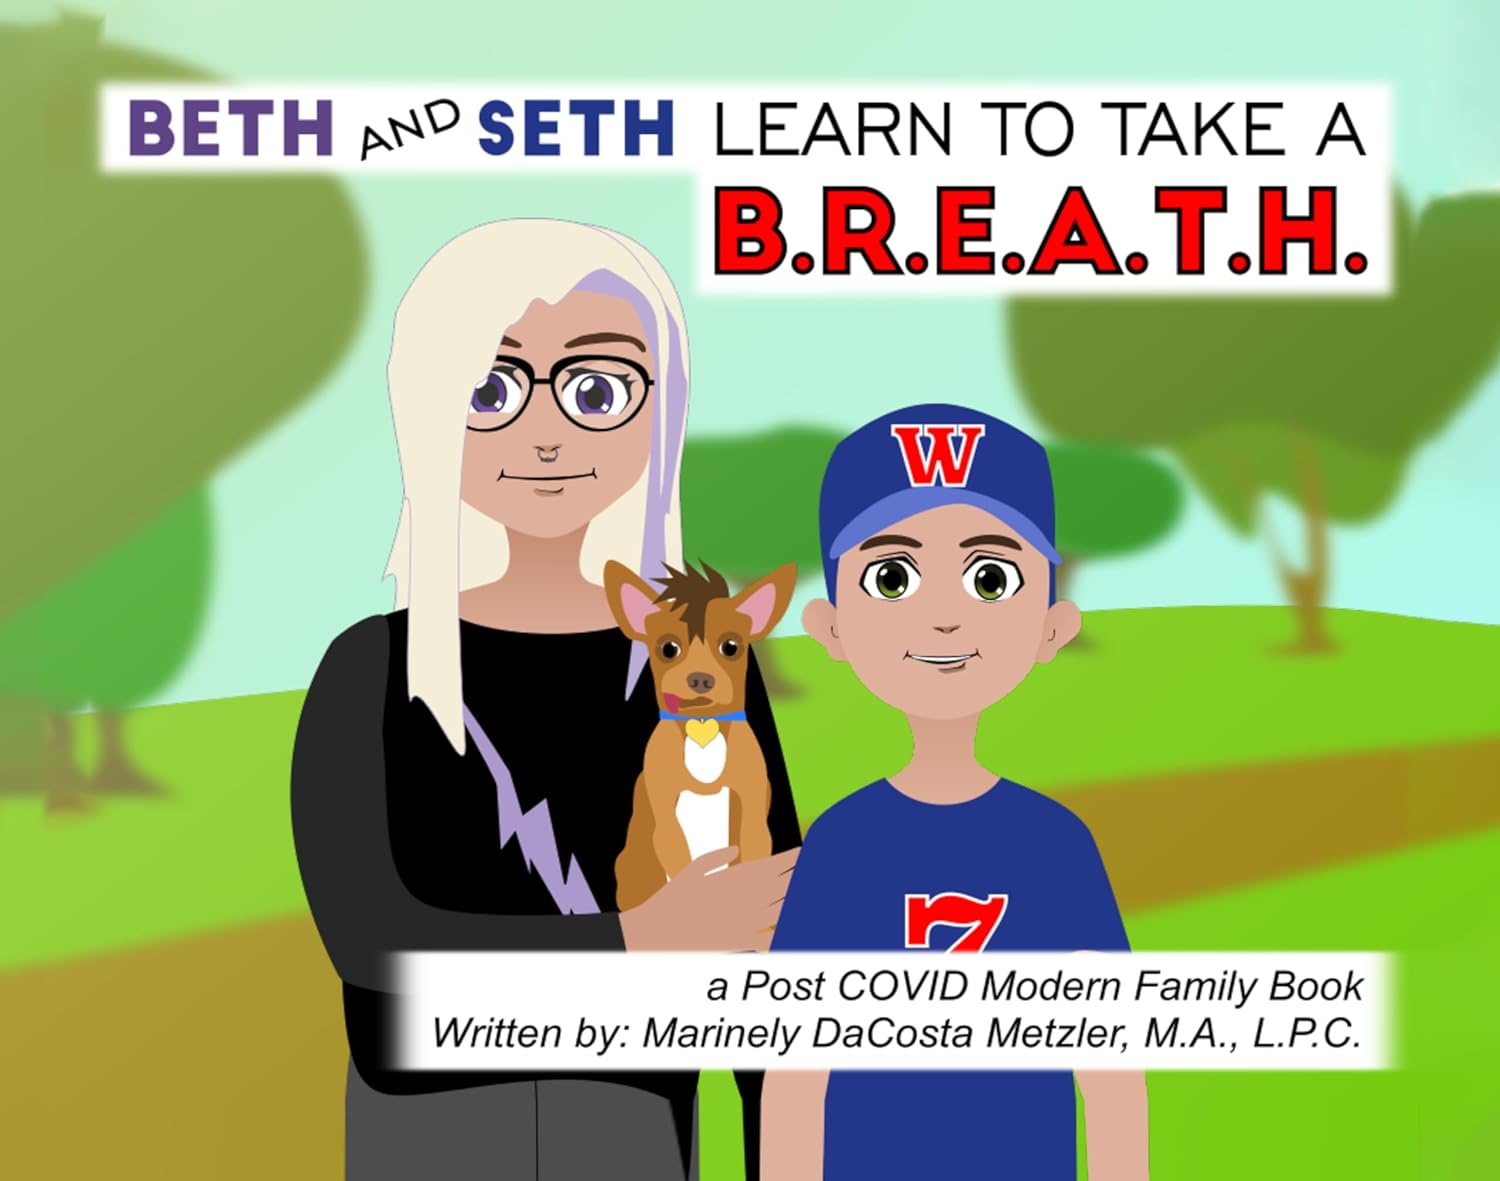 Author Marinely DaCosta Metzler Empowers Children and Teens to Navigate Emotions in New Book, "Beth and Seth Learn to Take a B.R.E.A.T.H."